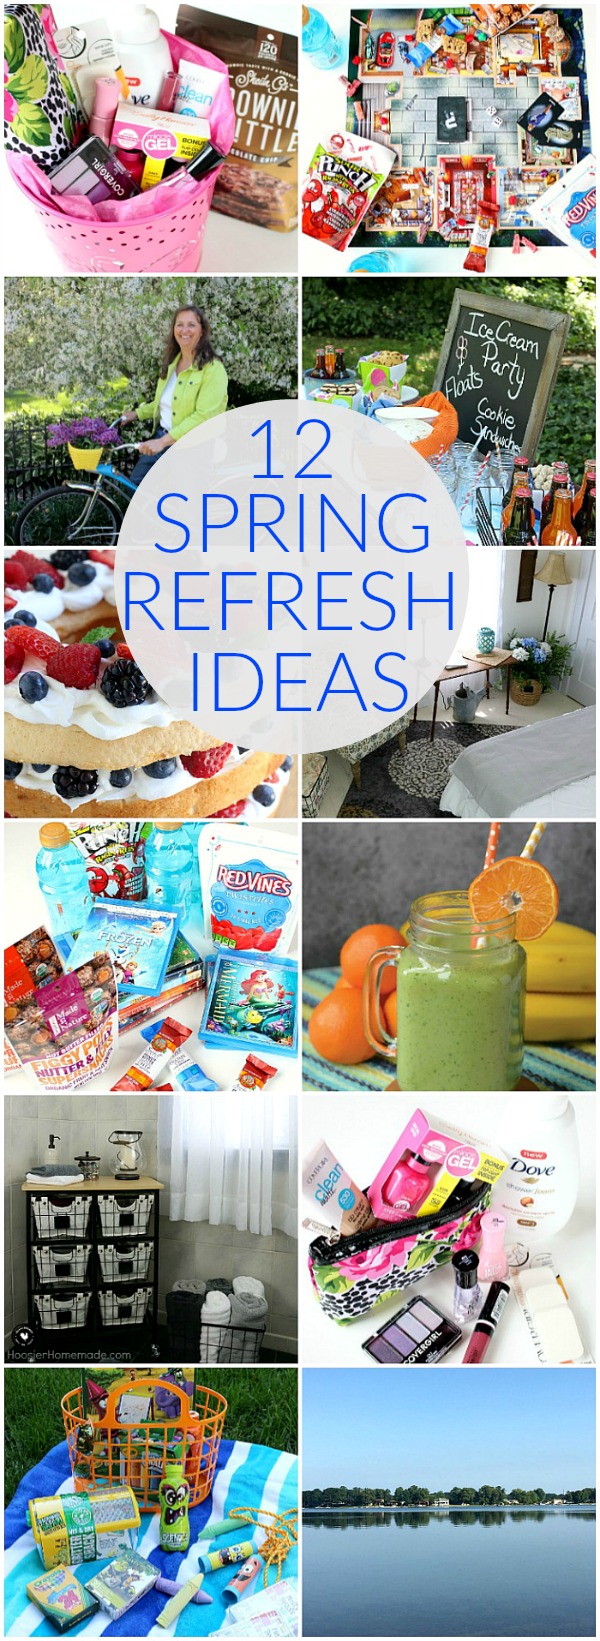 12 Ideas to Refresh your Home and Life for Spring